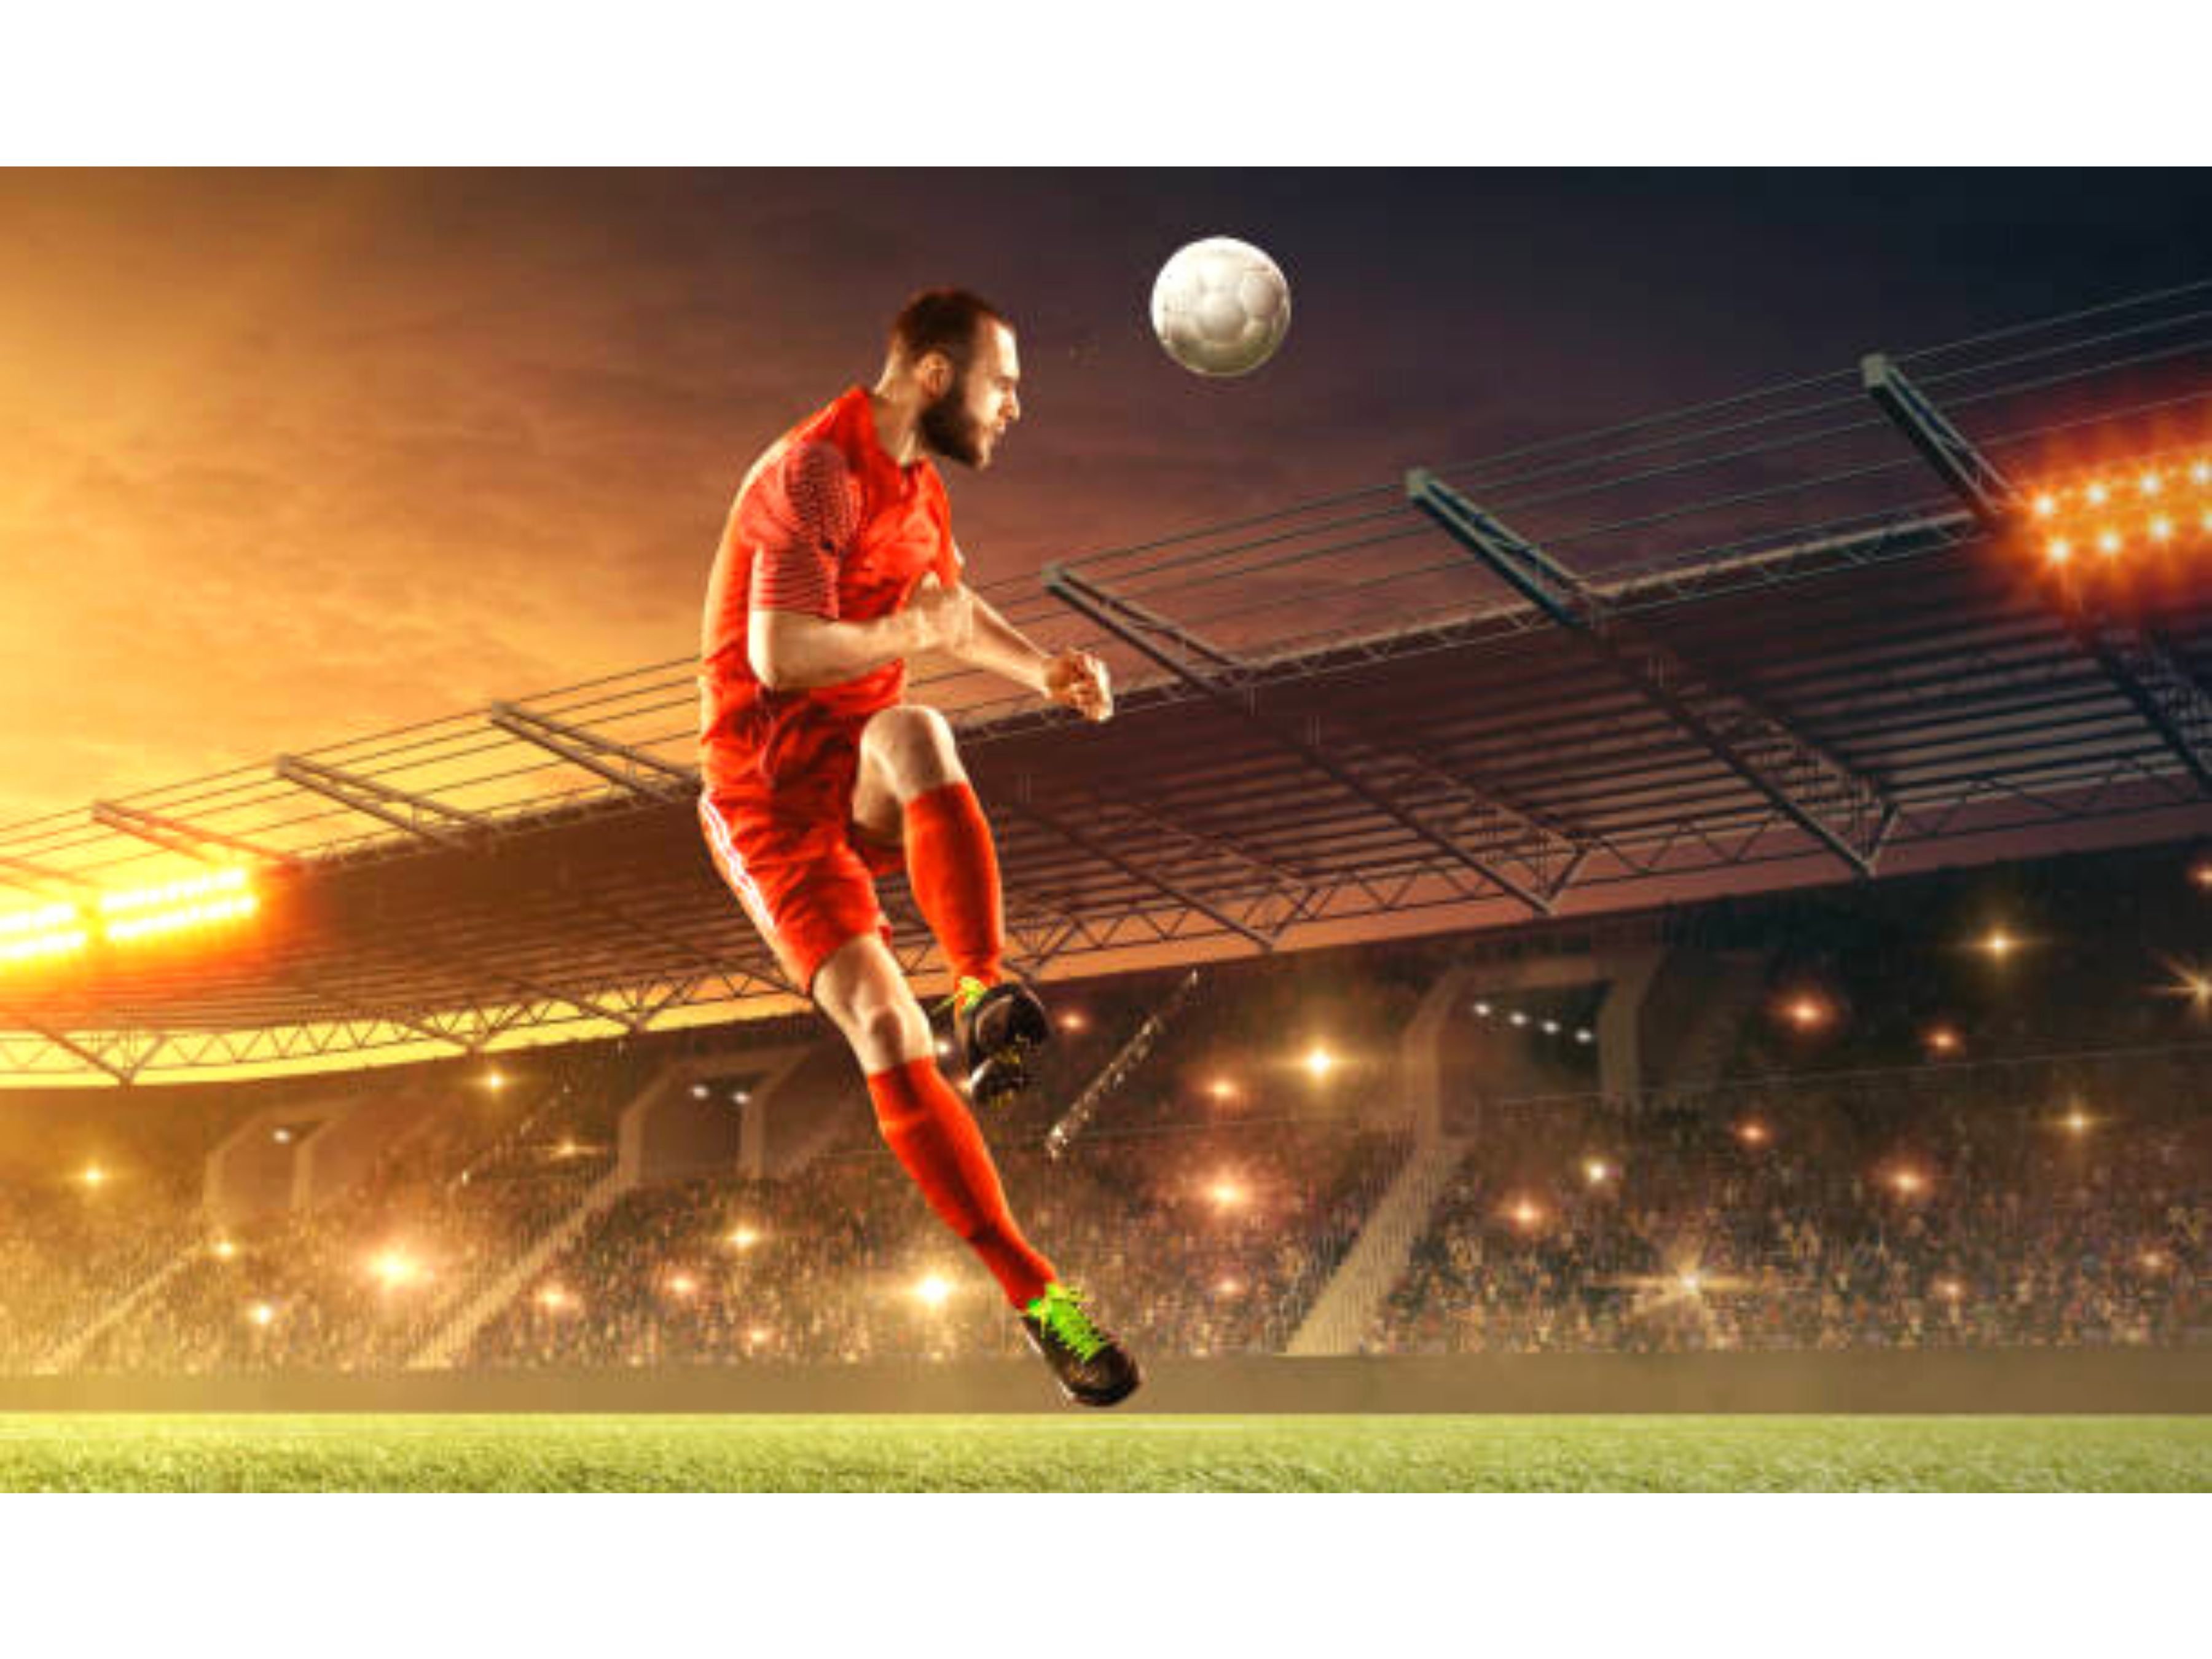 Heading the ball is linked to cognitive impairment in retired professional footballers